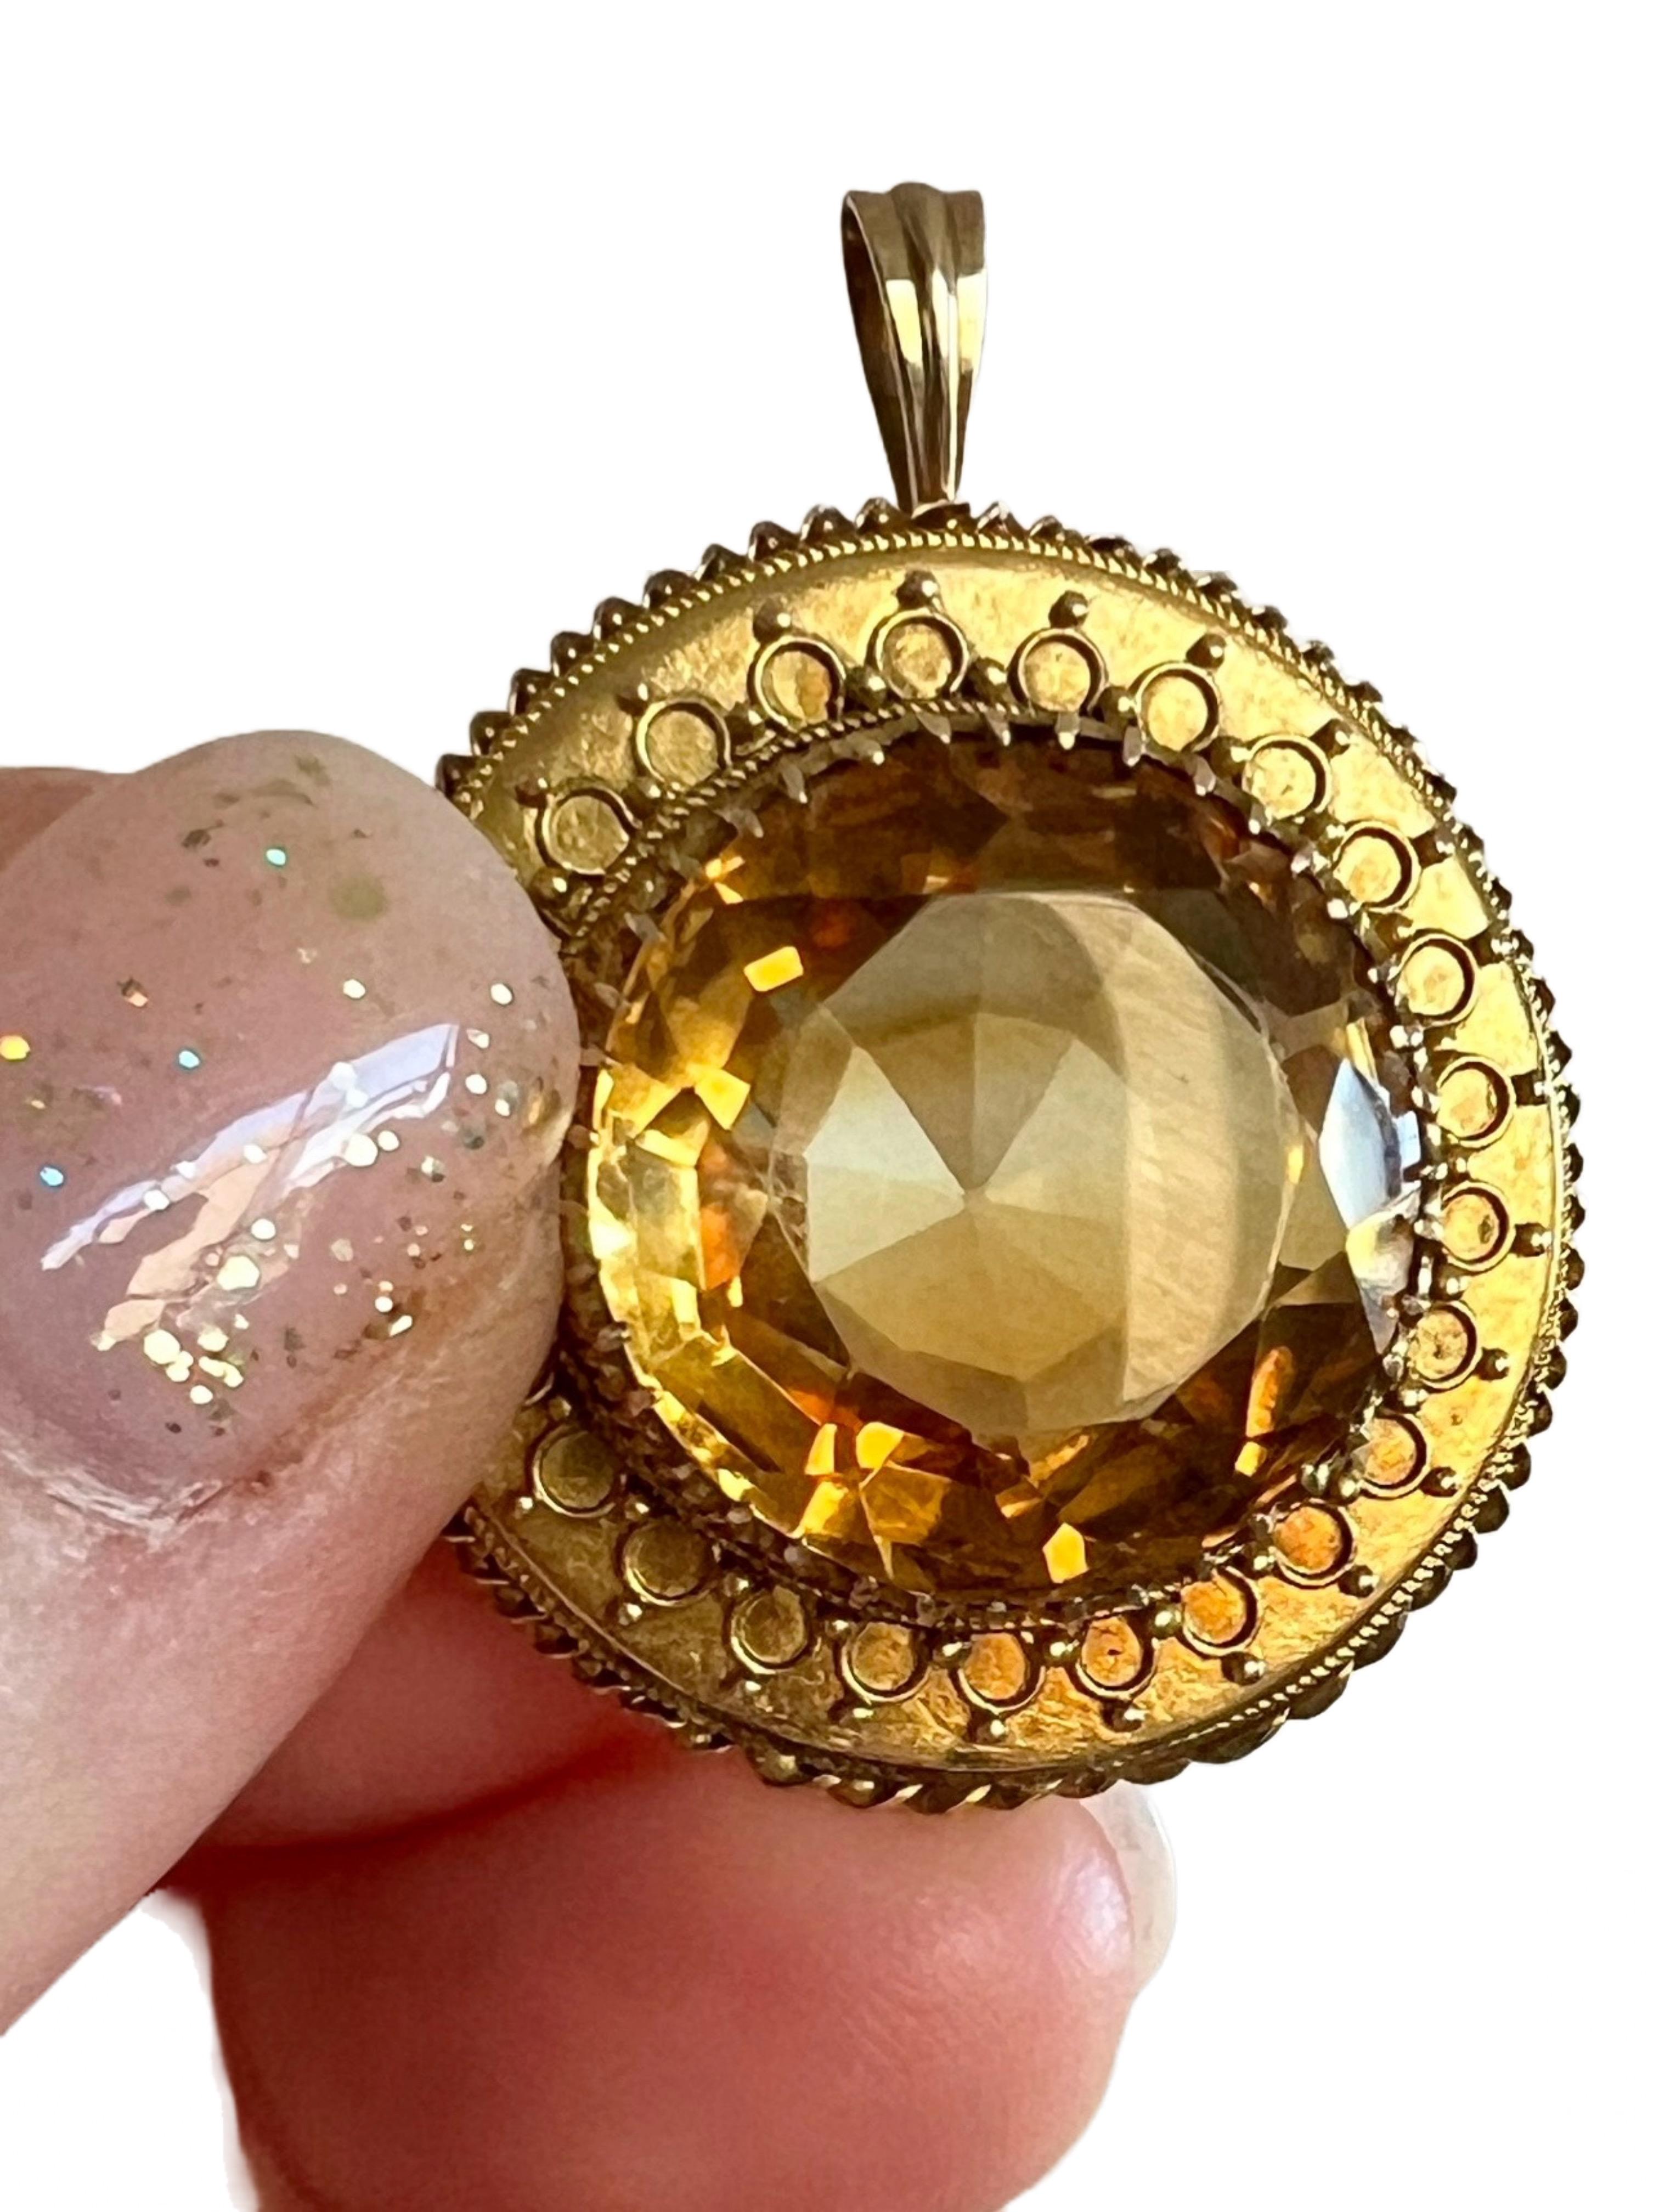 This beautiful necklace pendant is crafted from 14k yellow gold and features a large, round faceted citrine quartz gemstone in a stunning shade of medium dark orangish yellow with some lovely color banding. This pendant has a magical allure about it